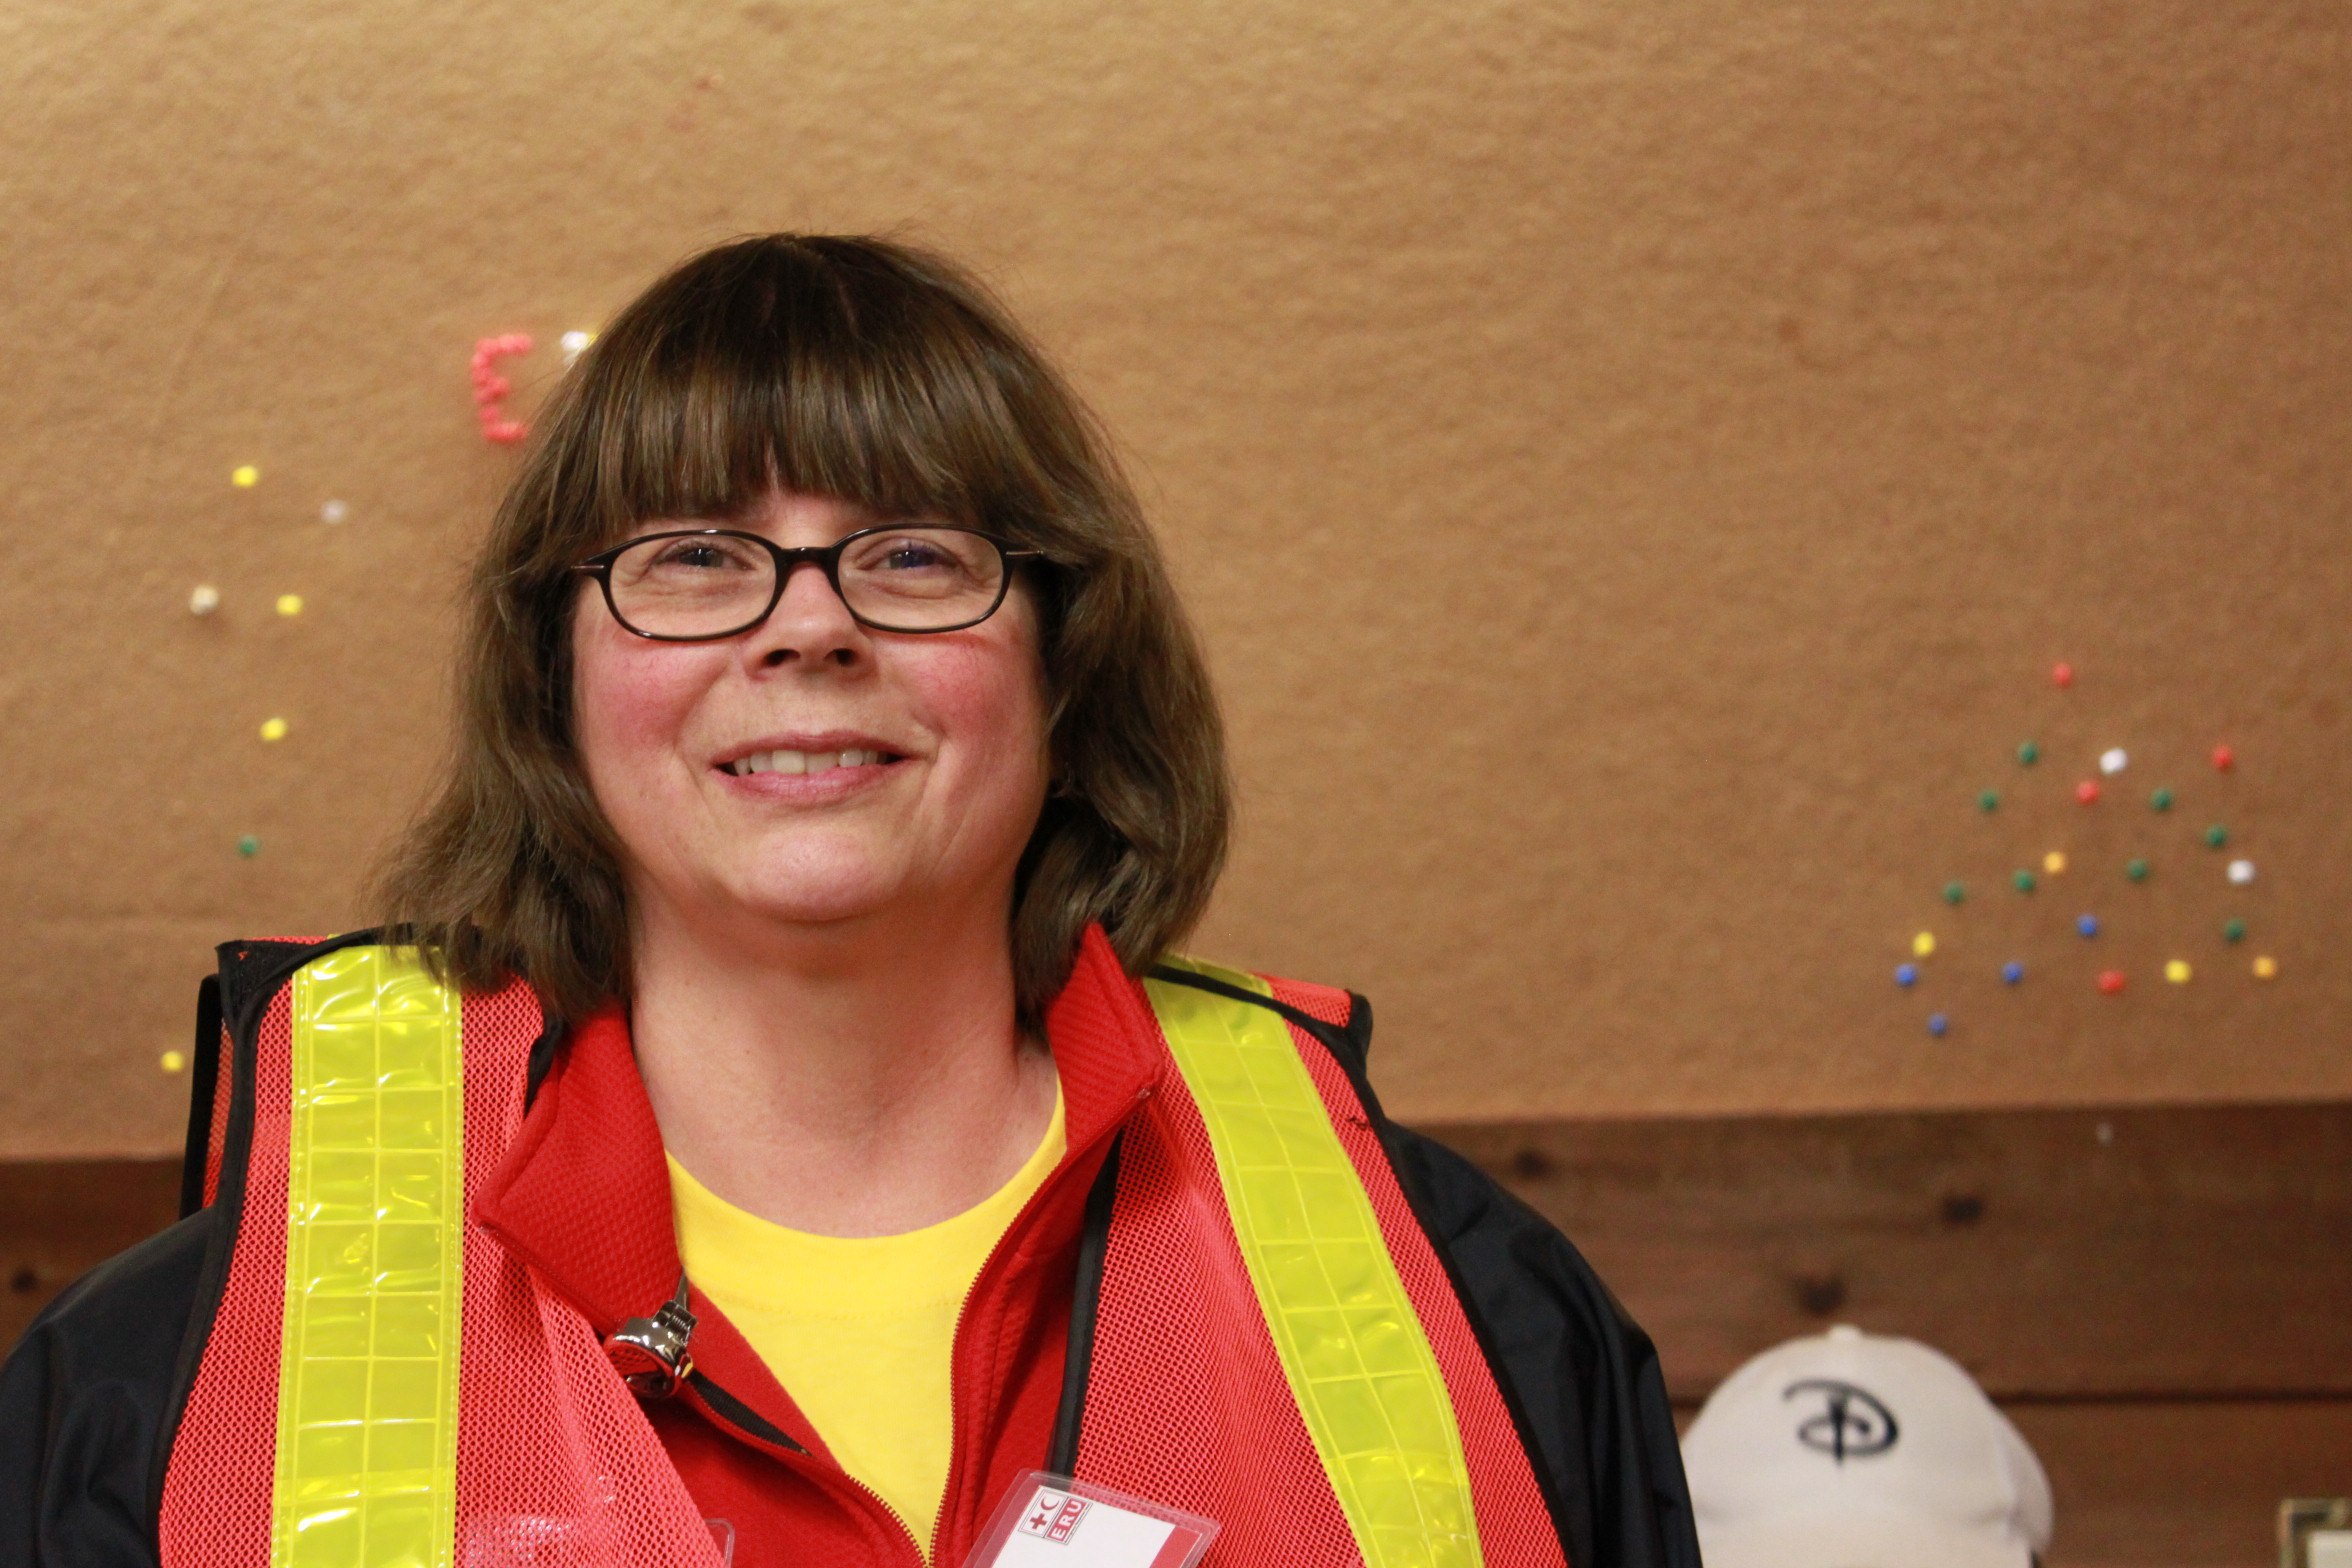 Bev is a Disaster Management volunteer in York Region volunteering at the ERU training and helping co-ordinate the mass casualty simulation.